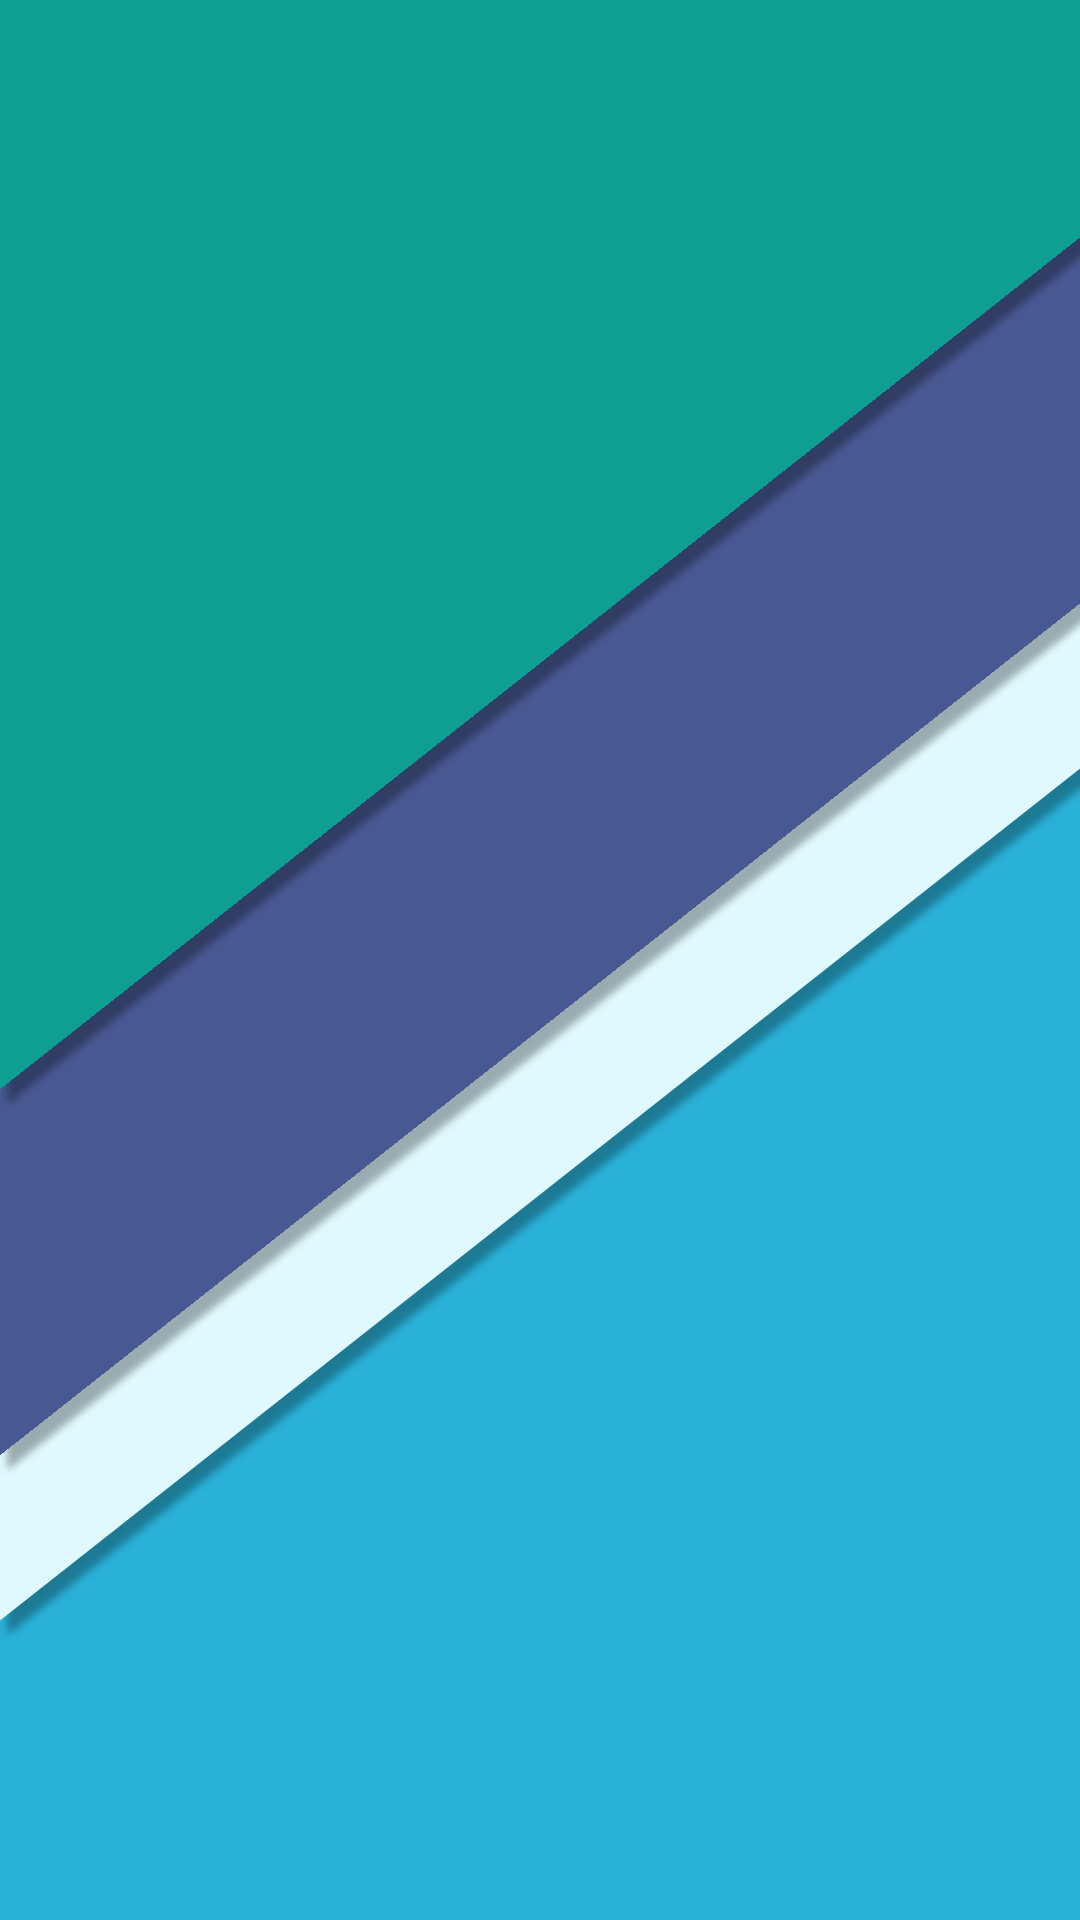 Free download 25 Material Design Inspired Wallpapers [1080x1920